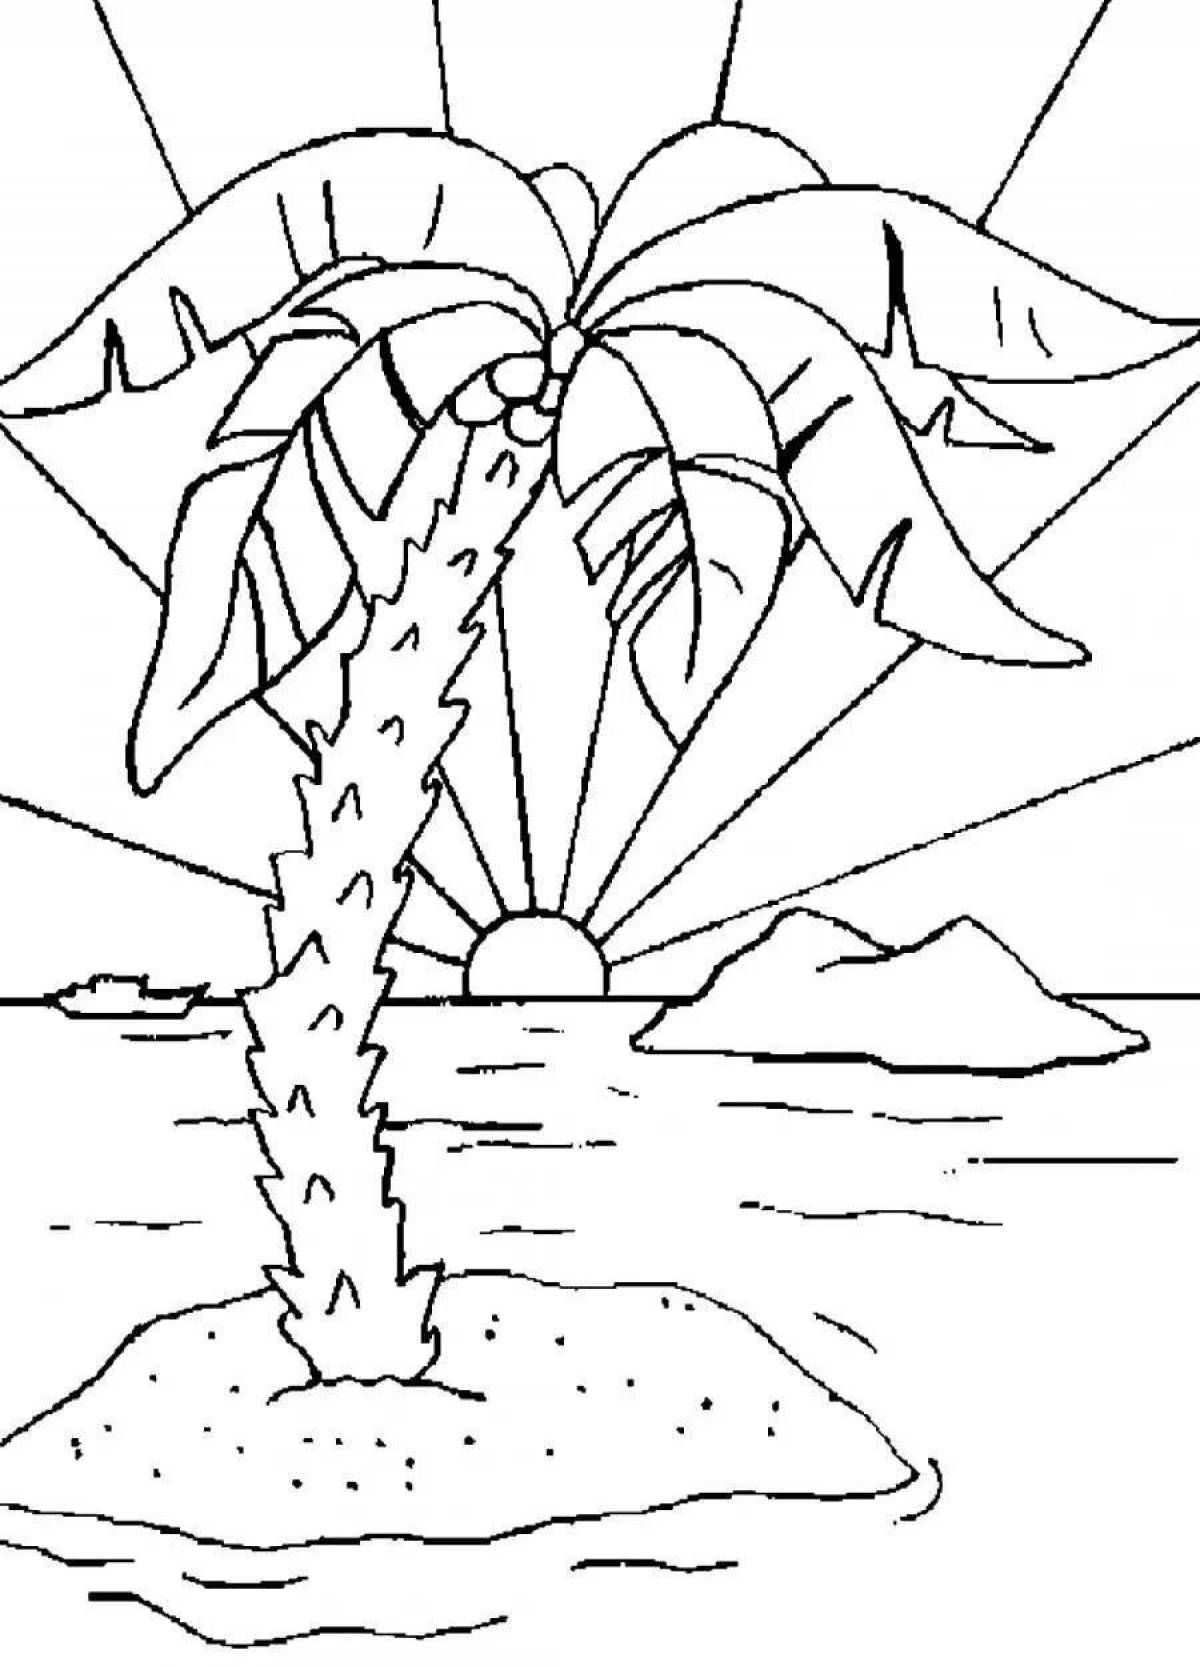 Coloring amazing island for kids